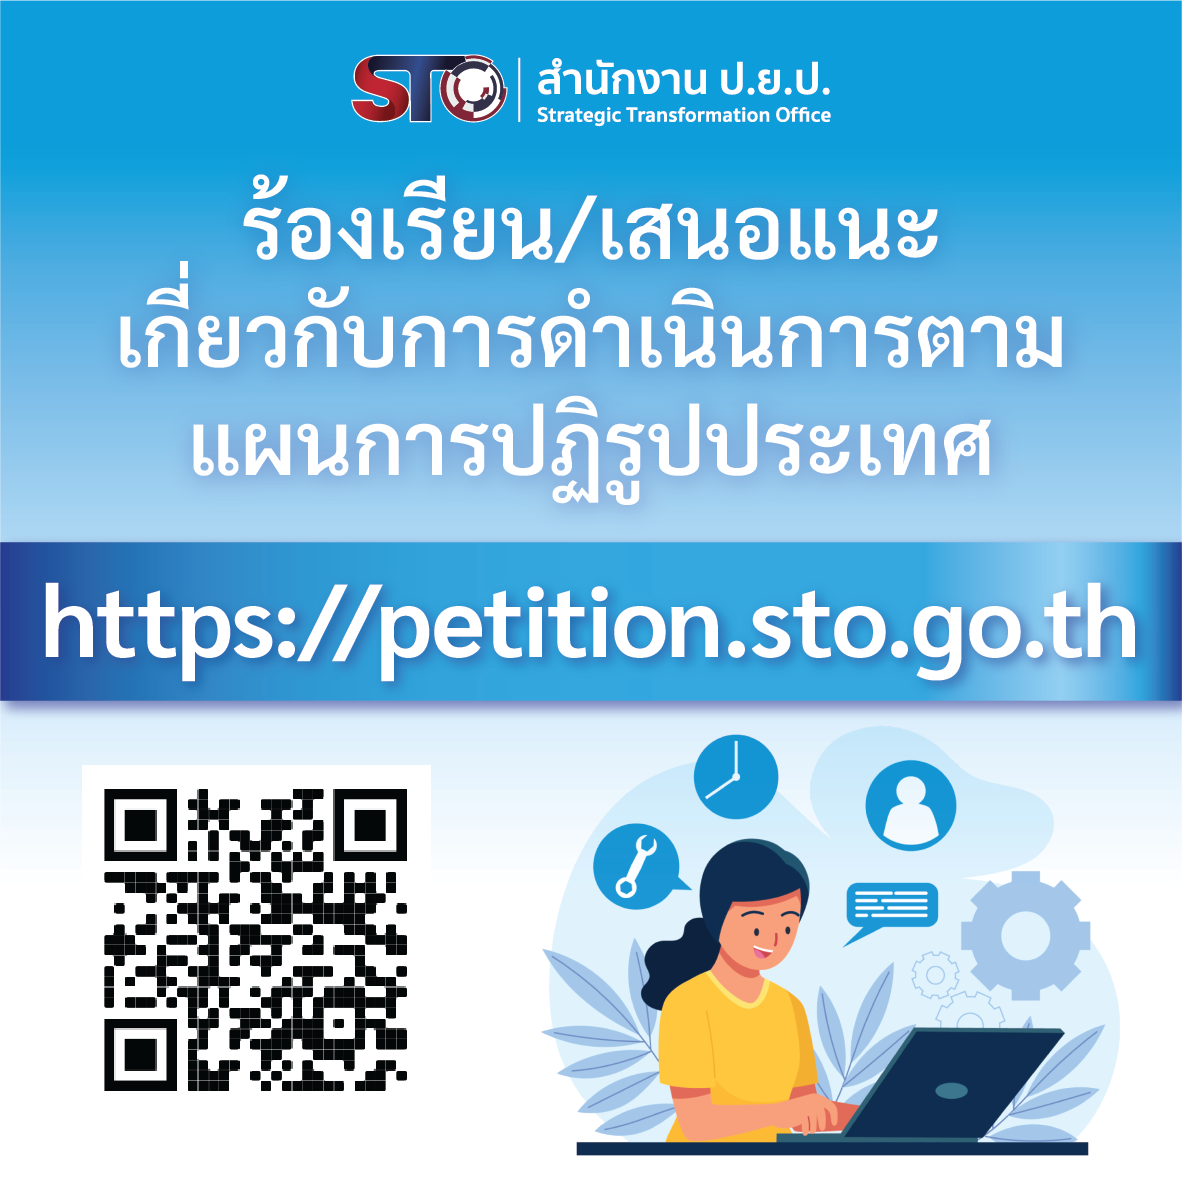 Petition_banner_650303-02.png